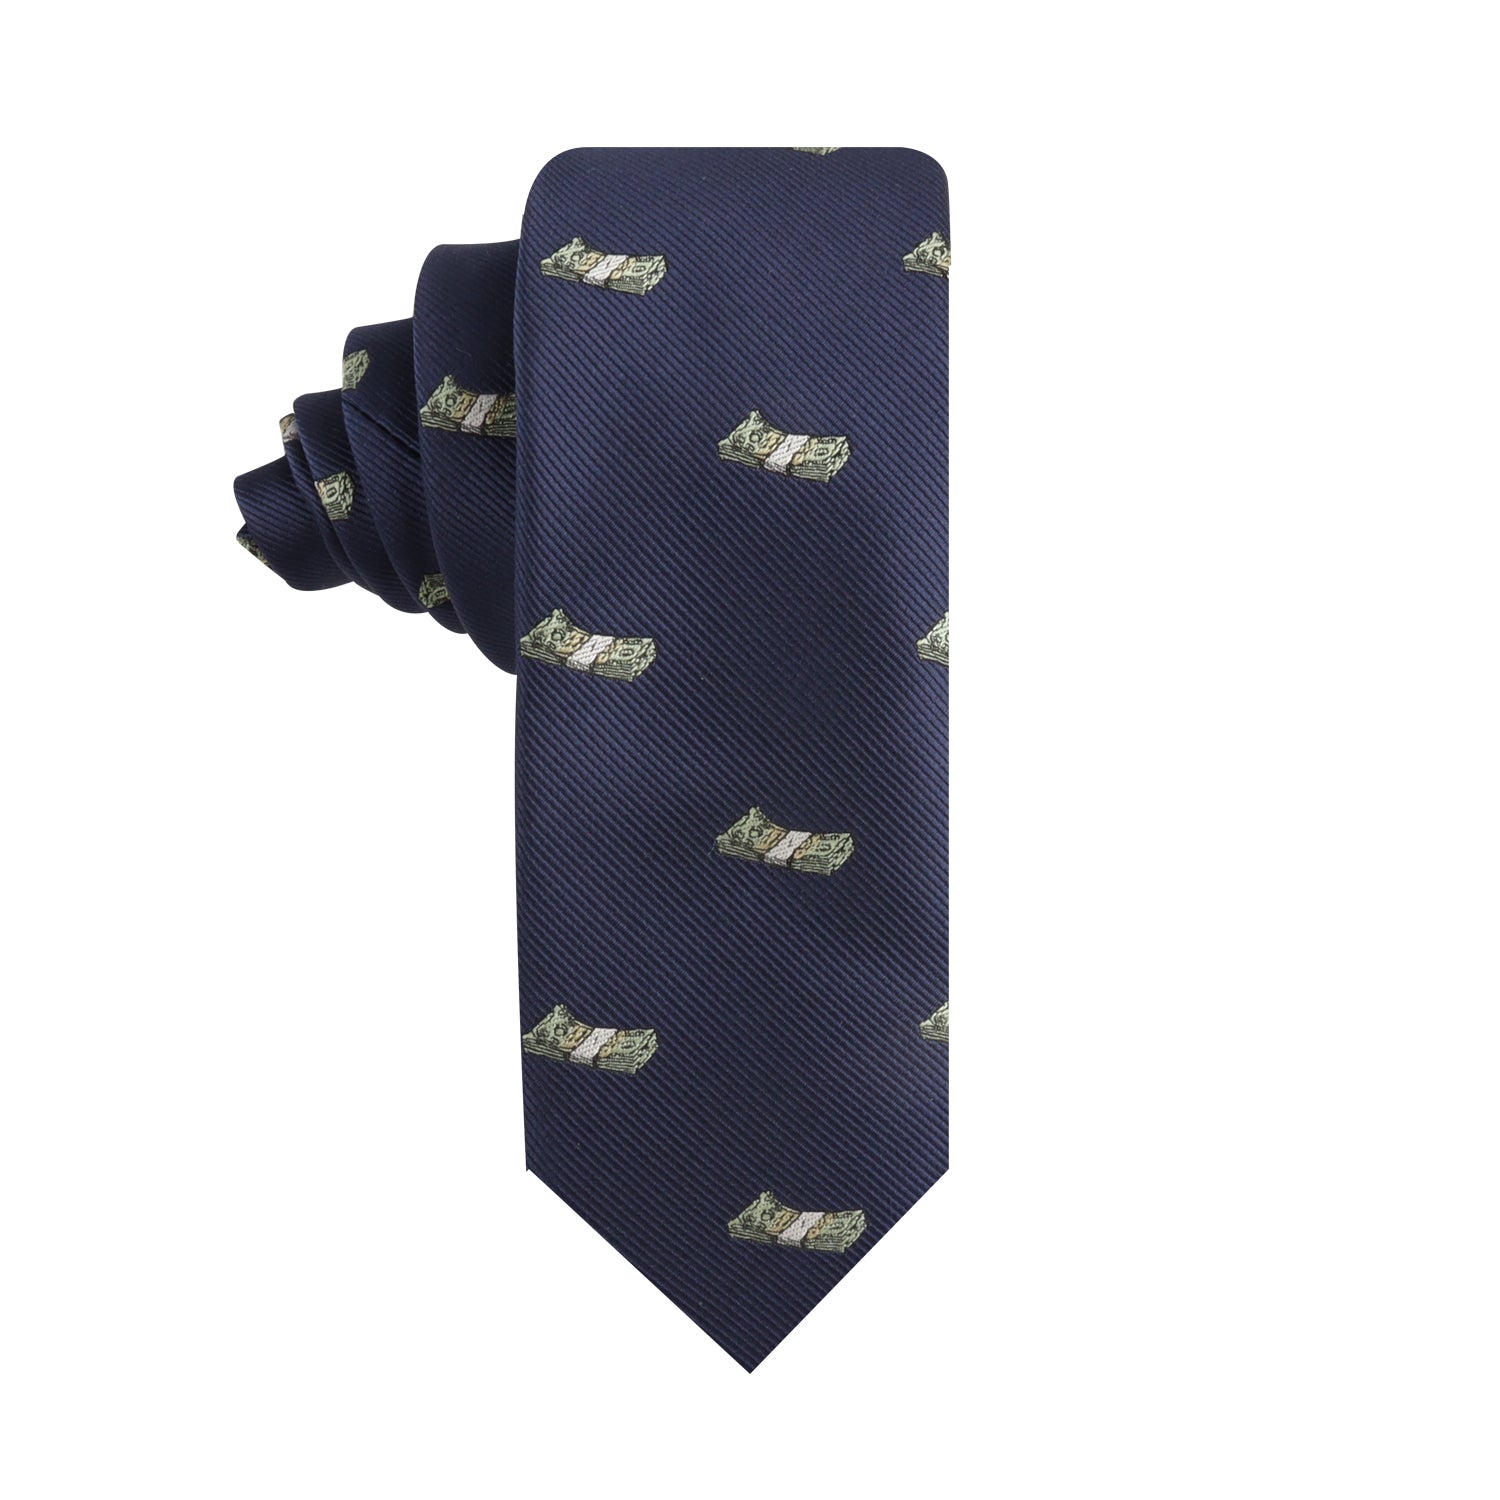 A luxe navy Cash Skinny Tie adorned with a dollar bill to add a touch of affluence to your look.